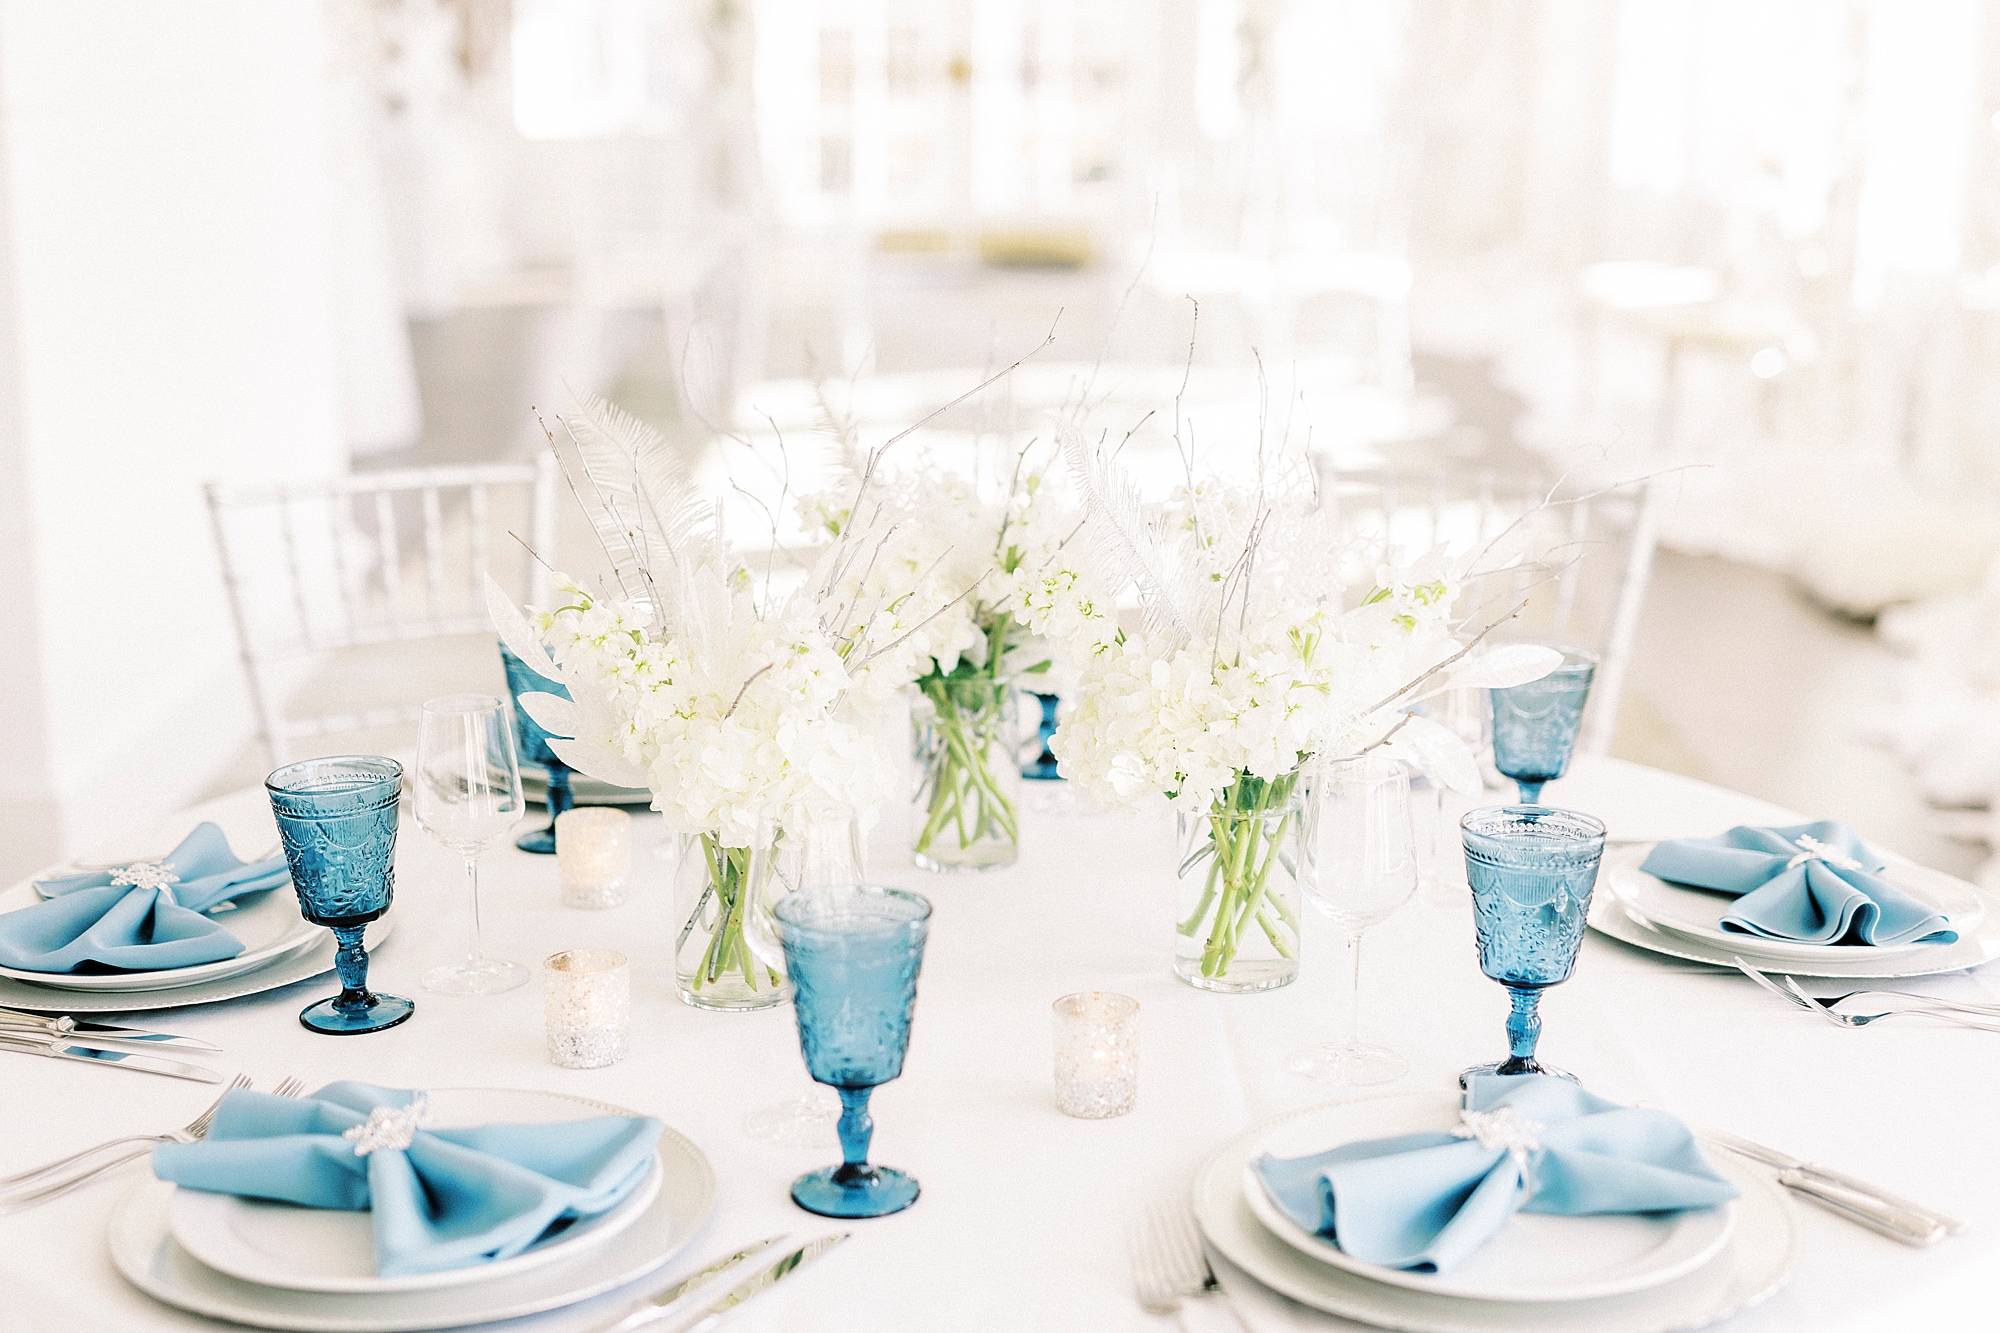 place settings with blue glasses and napkins for Winter Wonderland wedding at River Run Country Club